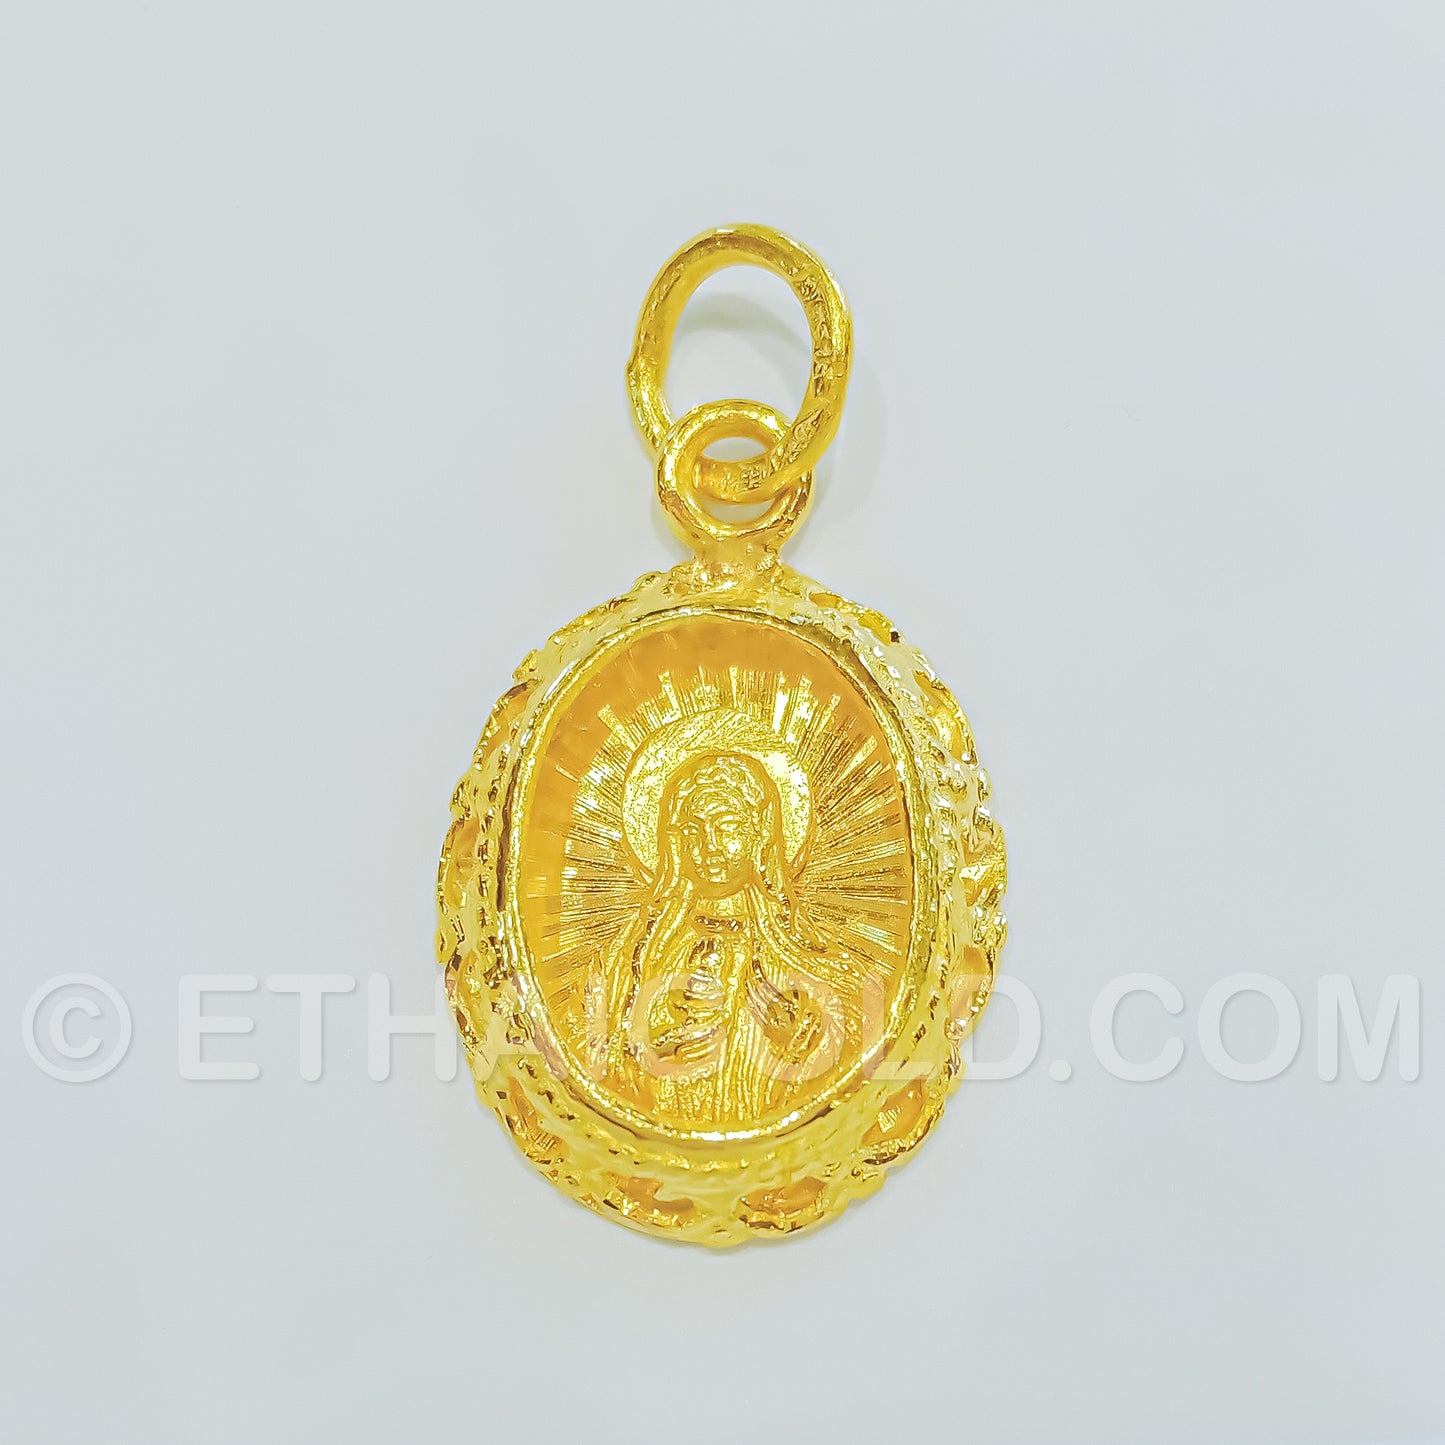 1/2 BAHT POLISHED MATTE DIAMOND-CUT SOLID OVAL-CASE VIRGIN MARY CHRISTIAN PENDANT IN 23K GOLD (ID: P0602S)